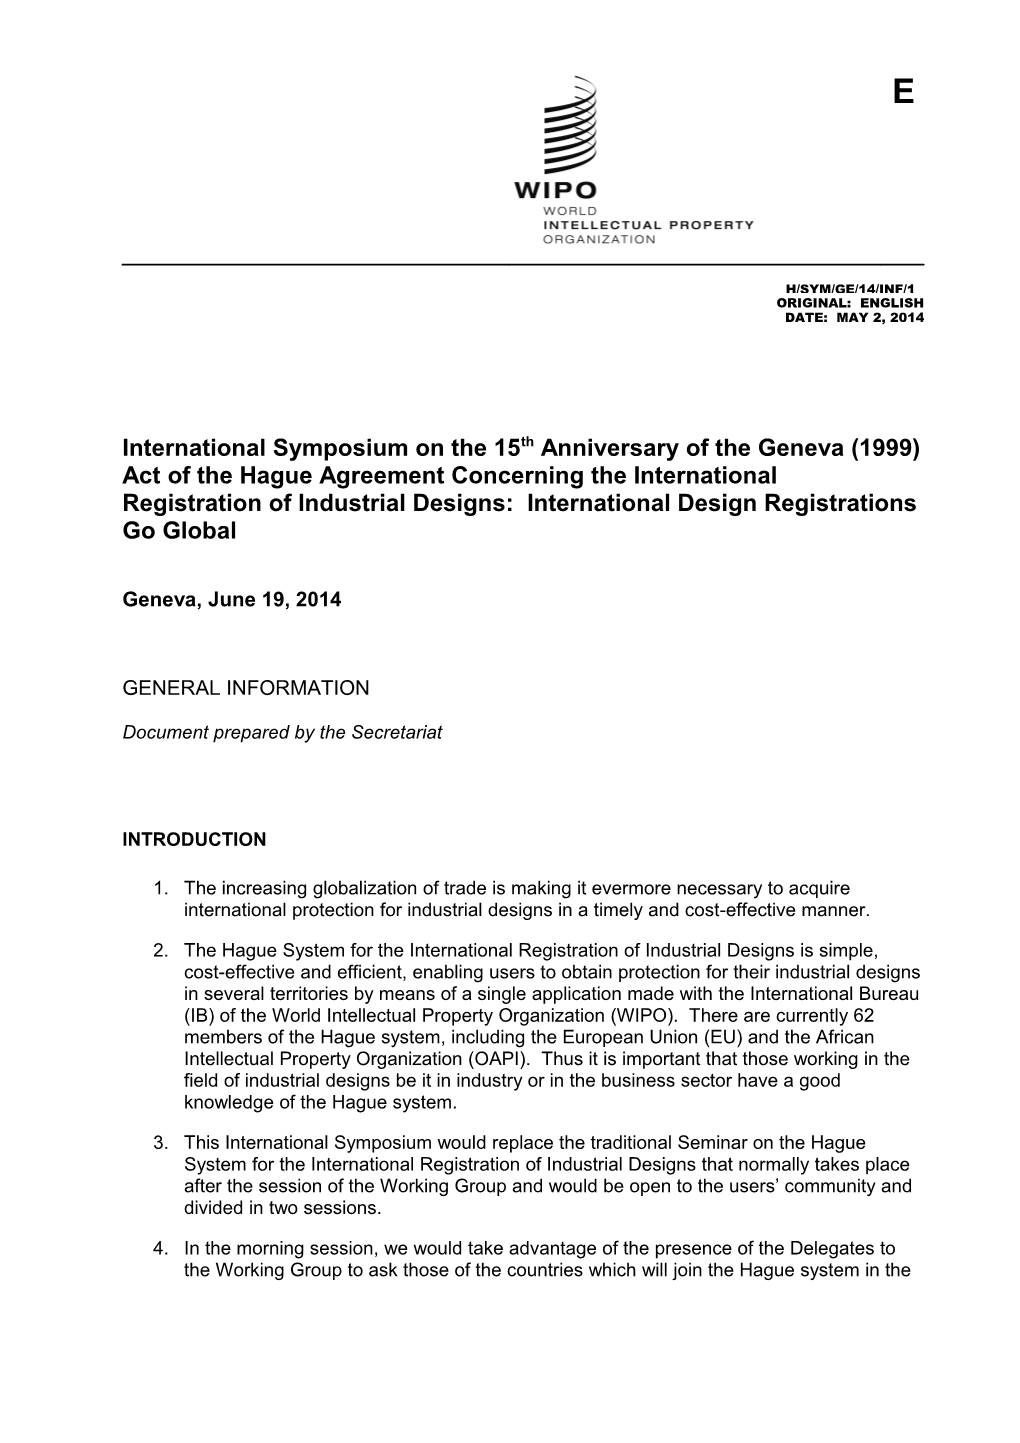 International Symposium on the 15Th Anniversary of the Geneva (1999) Act of the Hague